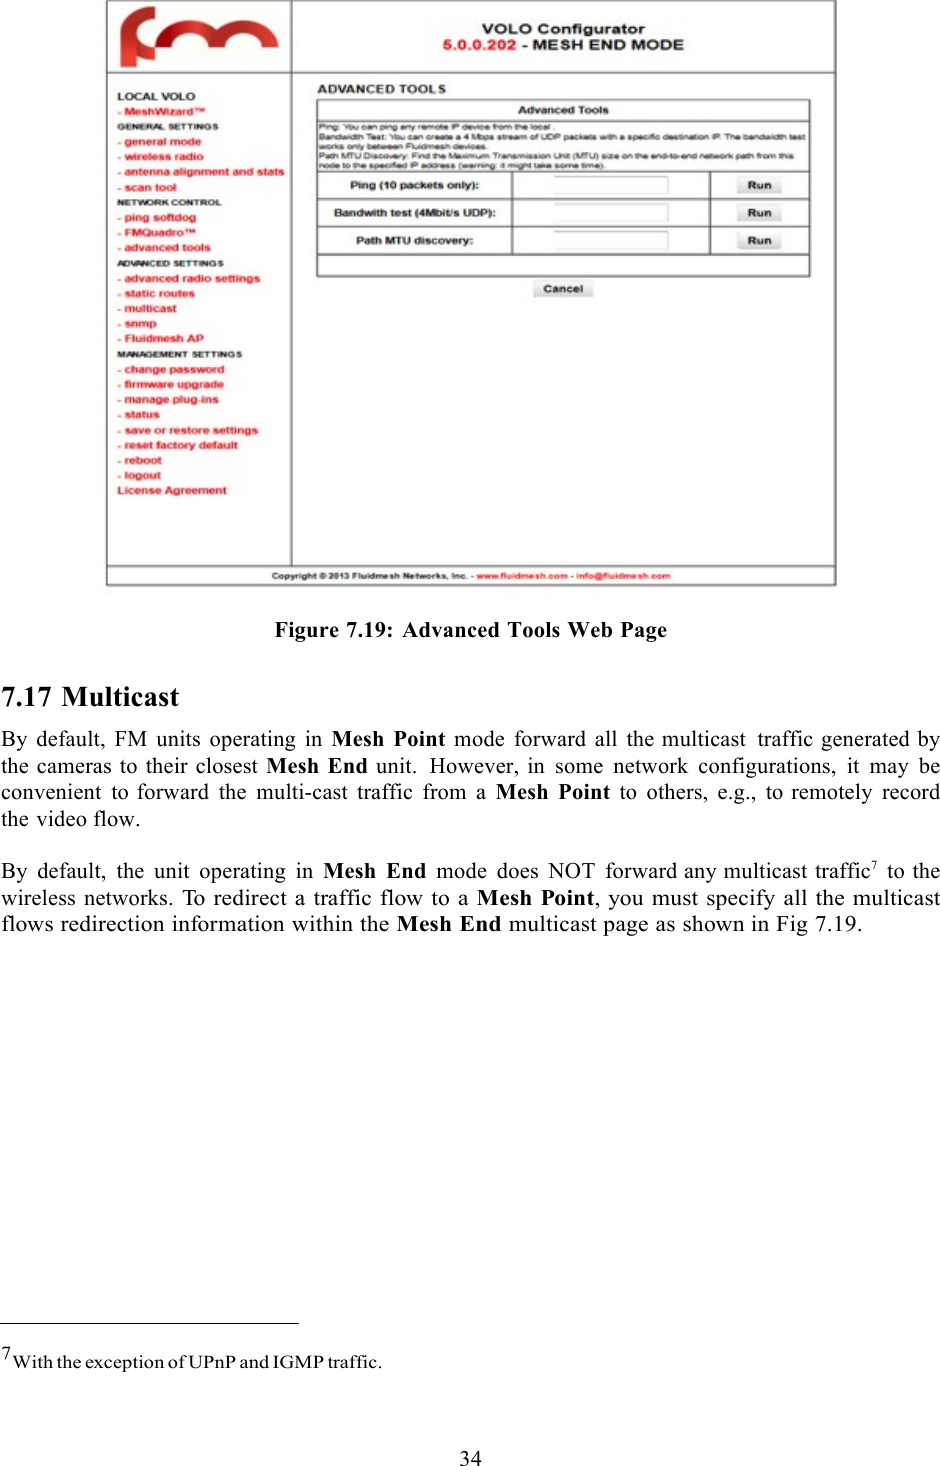  34     Figure 7.19:  Advanced Tools Web Page 7.17 Multicast By default, FM units operating in Mesh Point mode forward all the multicast traffic generated by the cameras to their closest Mesh End unit. However, in some network configurations, it may be convenient to forward the multi-cast traffic from a Mesh Point to others, e.g., to remotely record the video flow.  By default, the unit operating in Mesh End mode does NOT forward any multicast traffic7 to the wireless networks.  To redirect a traffic flow to a Mesh Point, you must specify all the multicast flows redirection information within the Mesh End multicast page as shown in Fig 7.19.                   7With the exception of UPnP and IGMP traffic.  